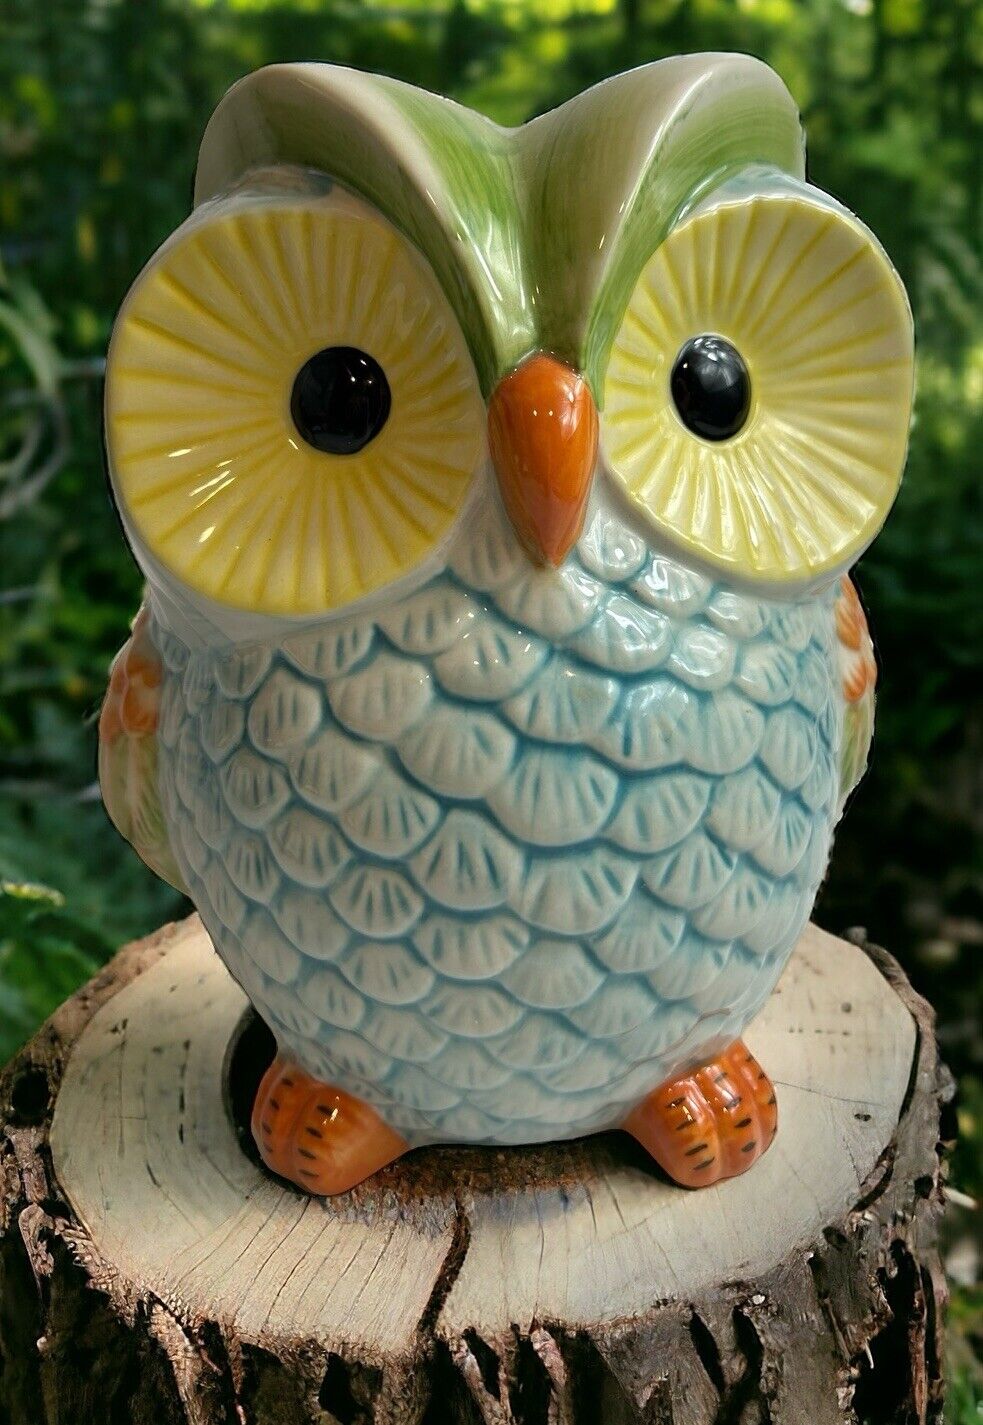 Big Eyed Ceramic Owl Piggy Bank Beautiful Colors 8 in Hold Lots Of Coin